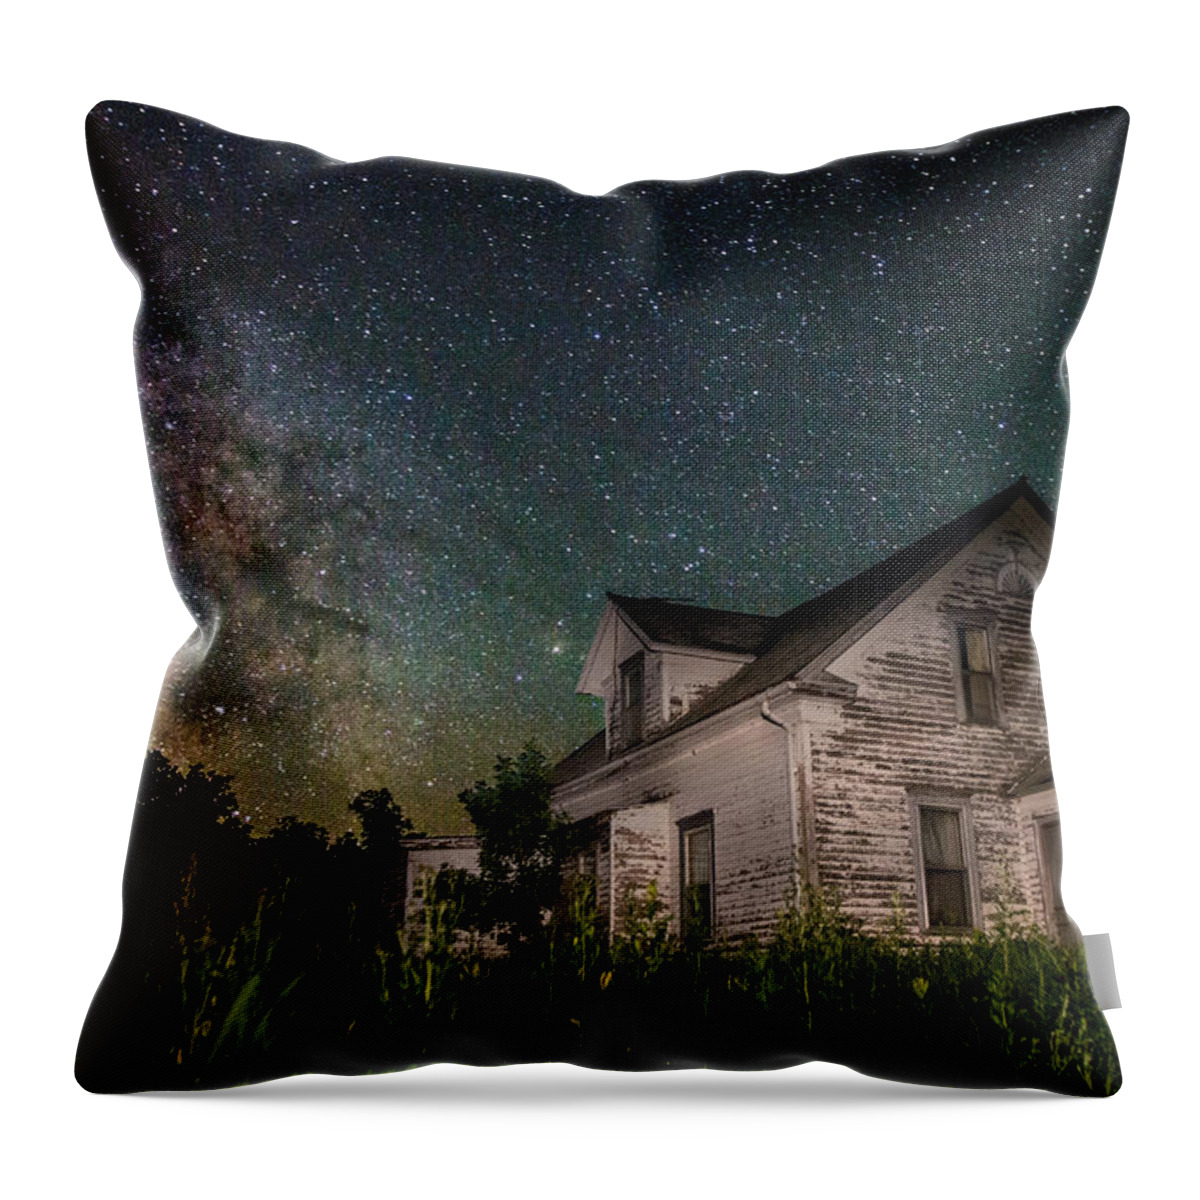 Dark Throw Pillow featuring the photograph Little White House by Aaron J Groen